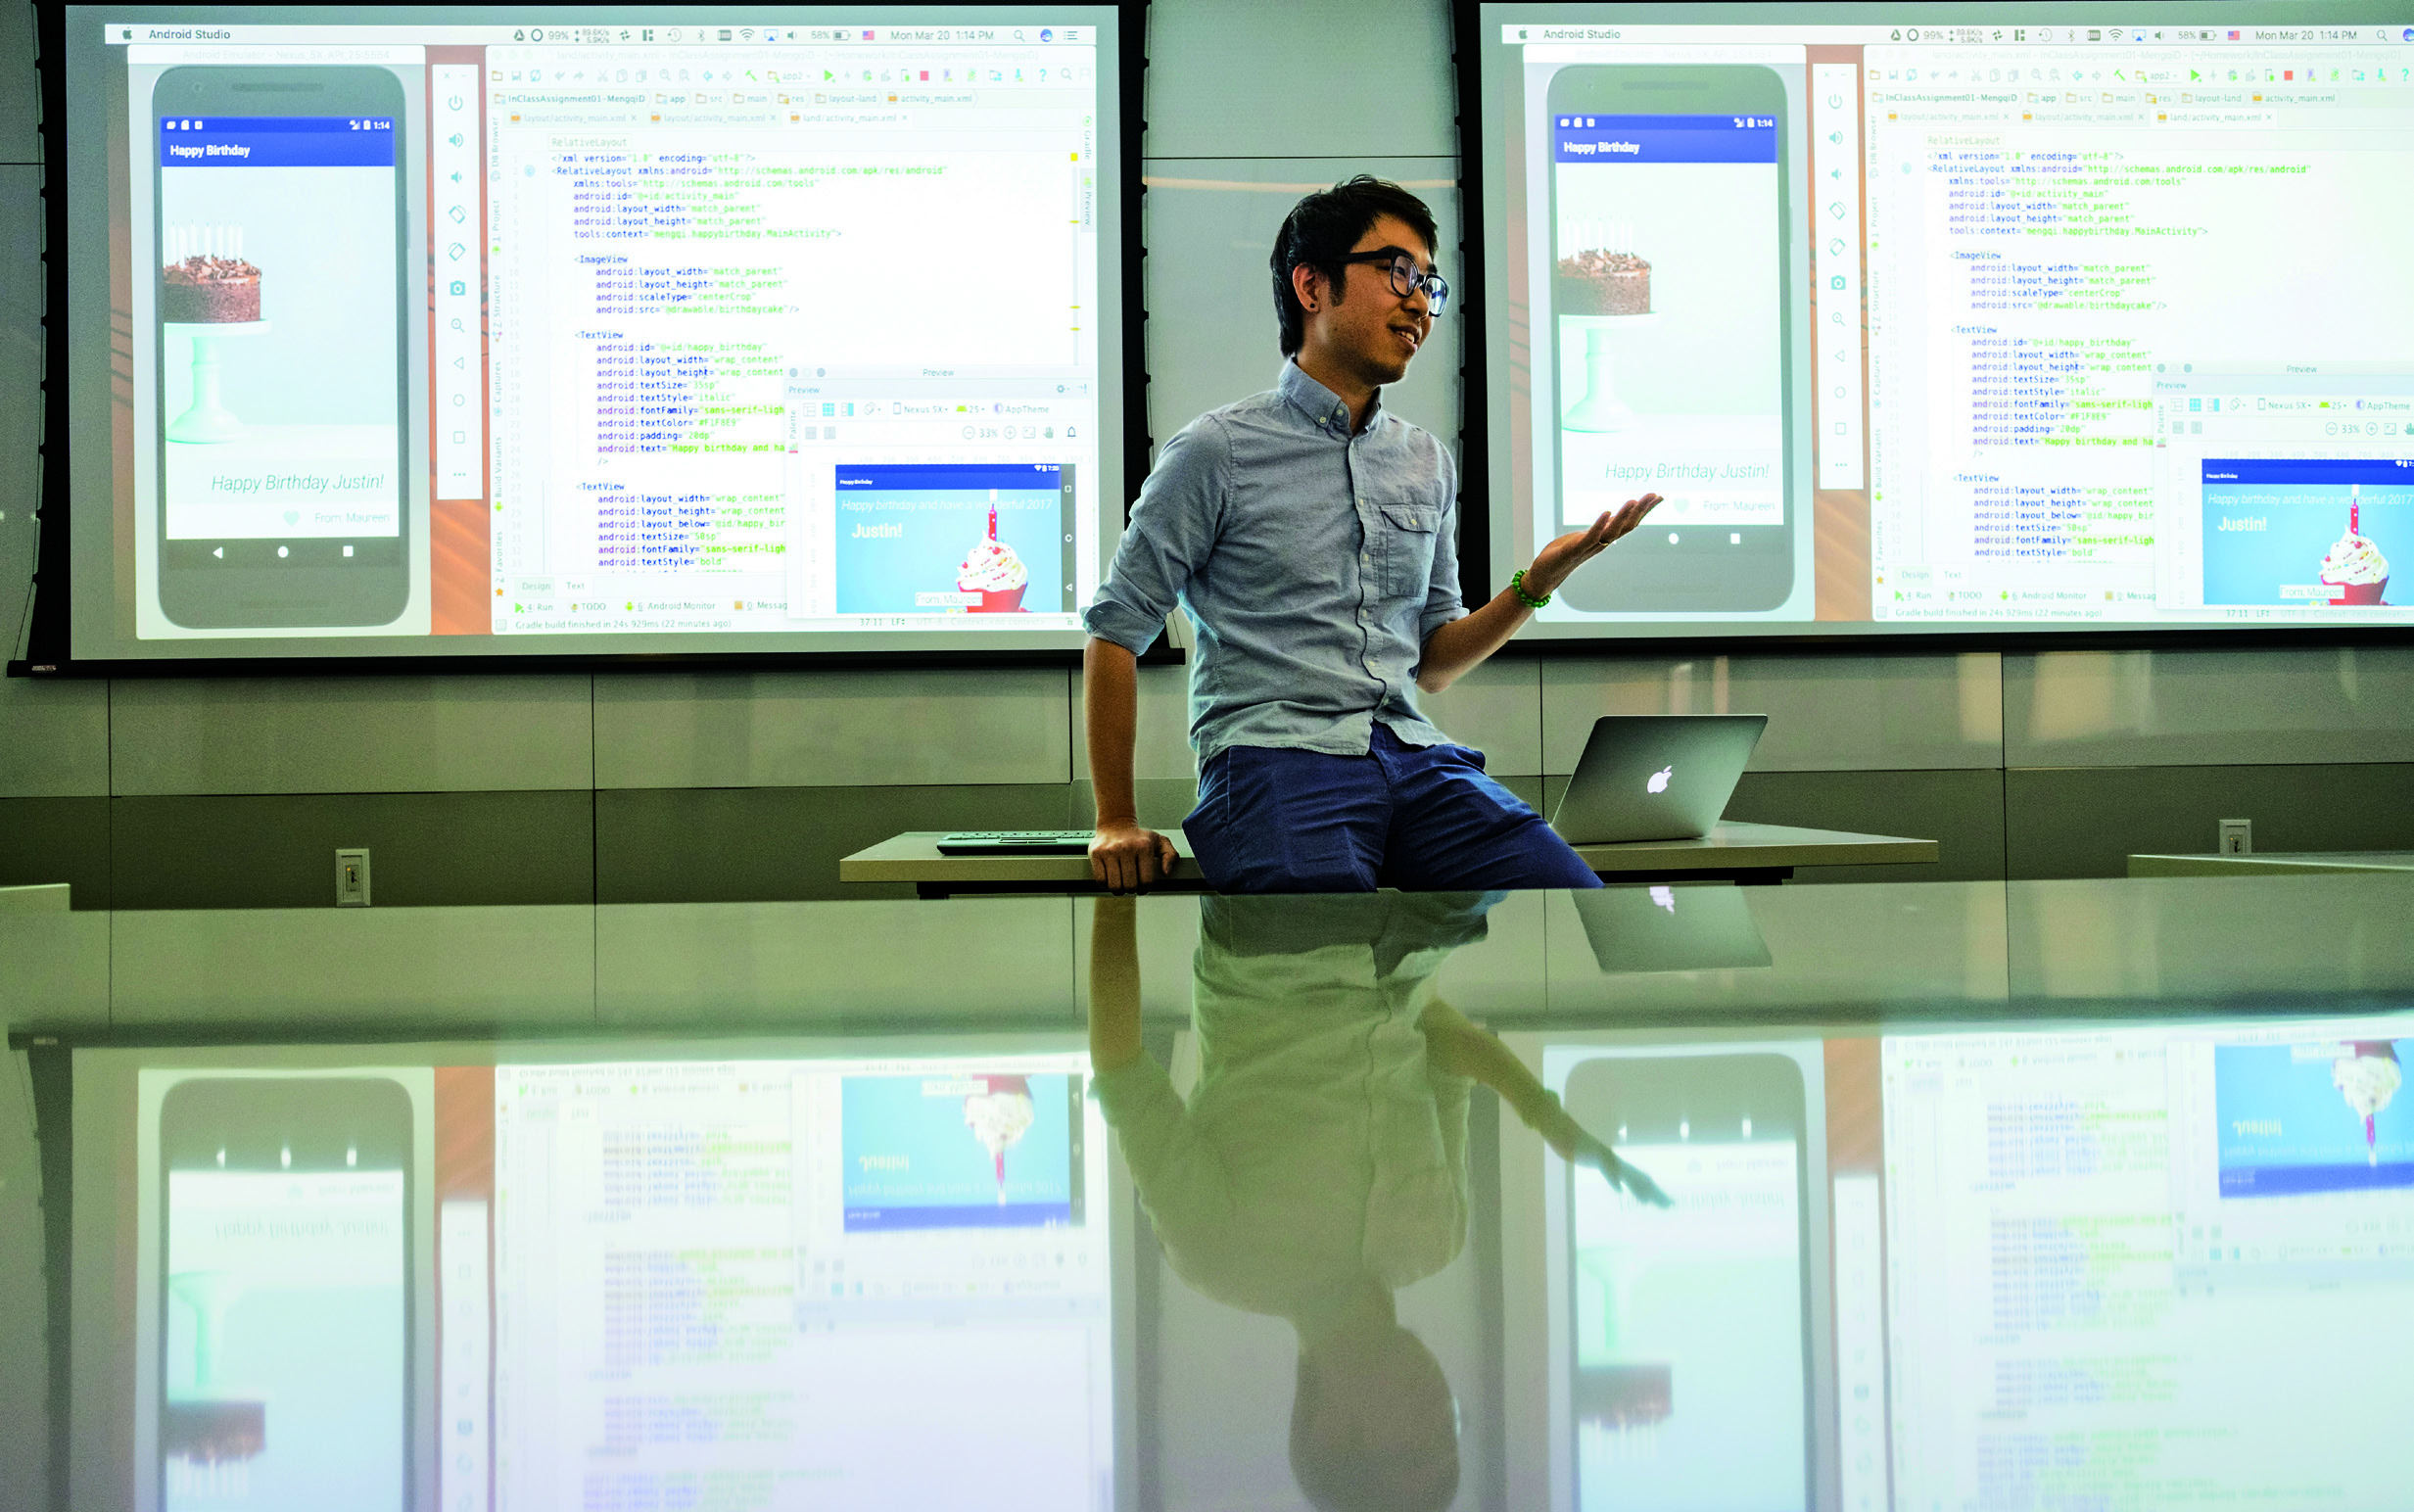 A “smart” classroom on Grace Dodge Hall’s second floor helps Math, Science & Technology Instructor Jonathan (Dasheng) Zhang get his message across about Android development.